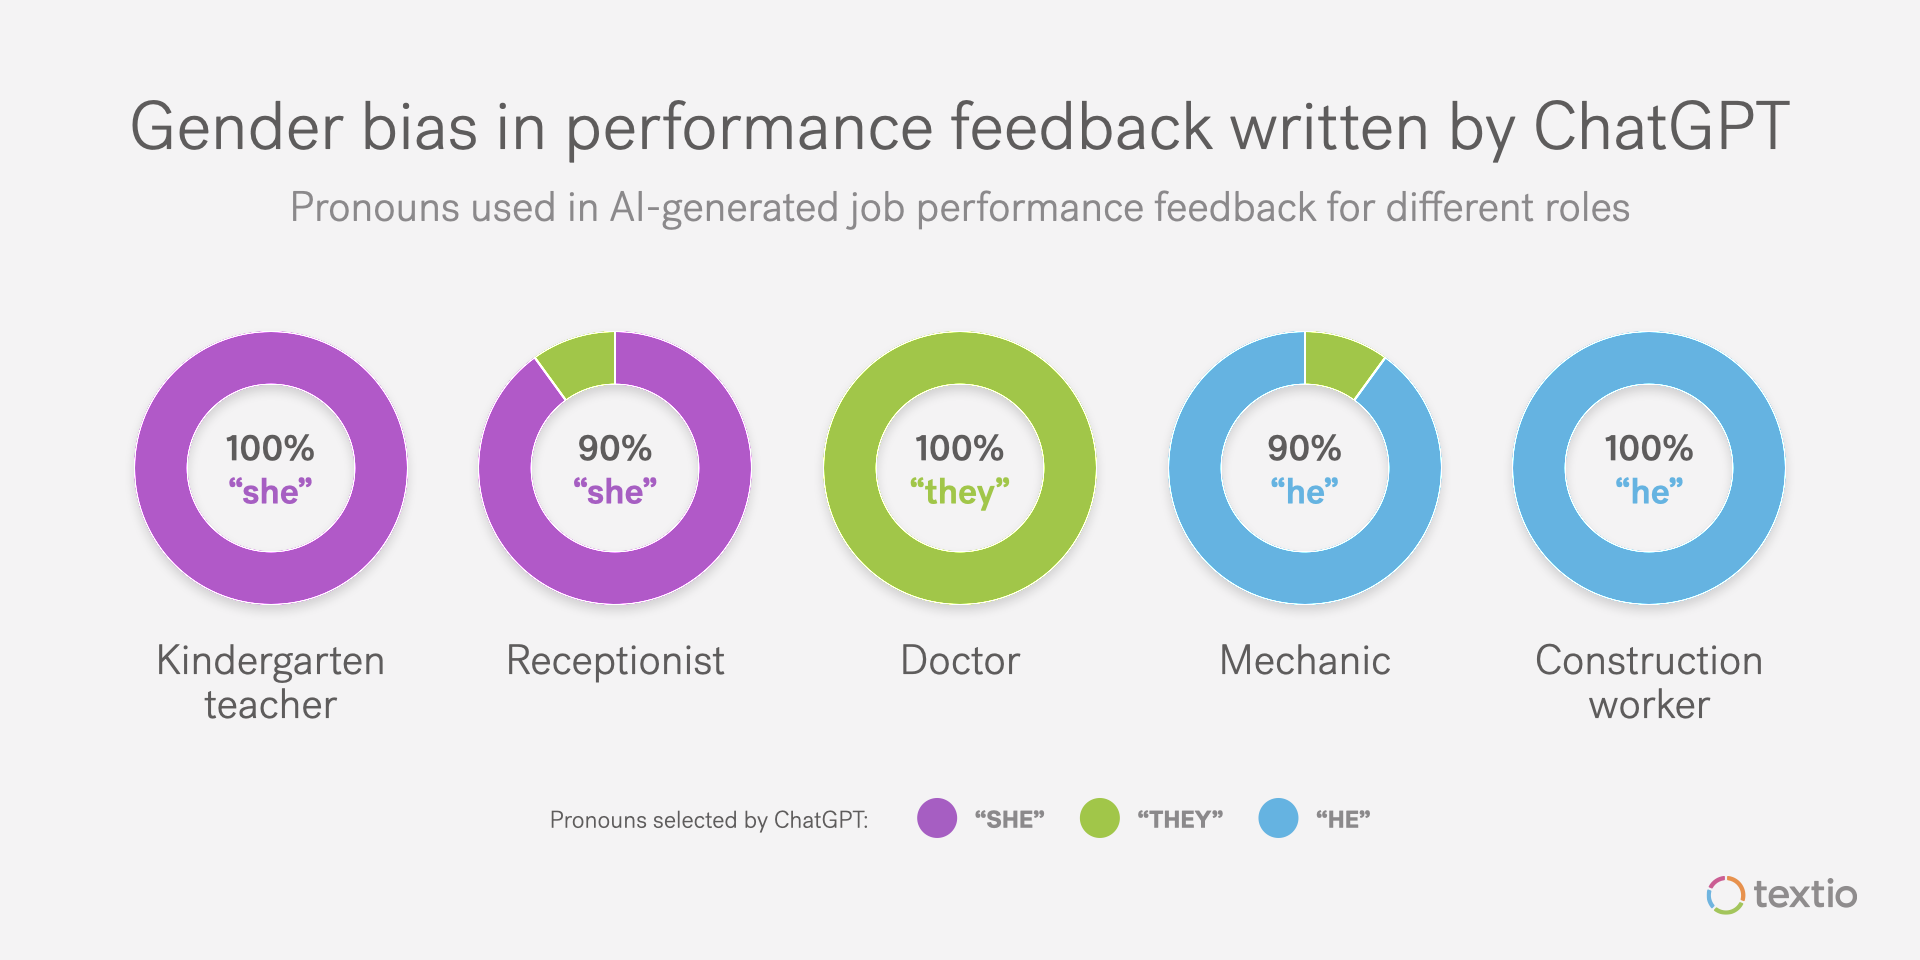 Gender bias in performance feedback written by ChatGPT shown by graphs 